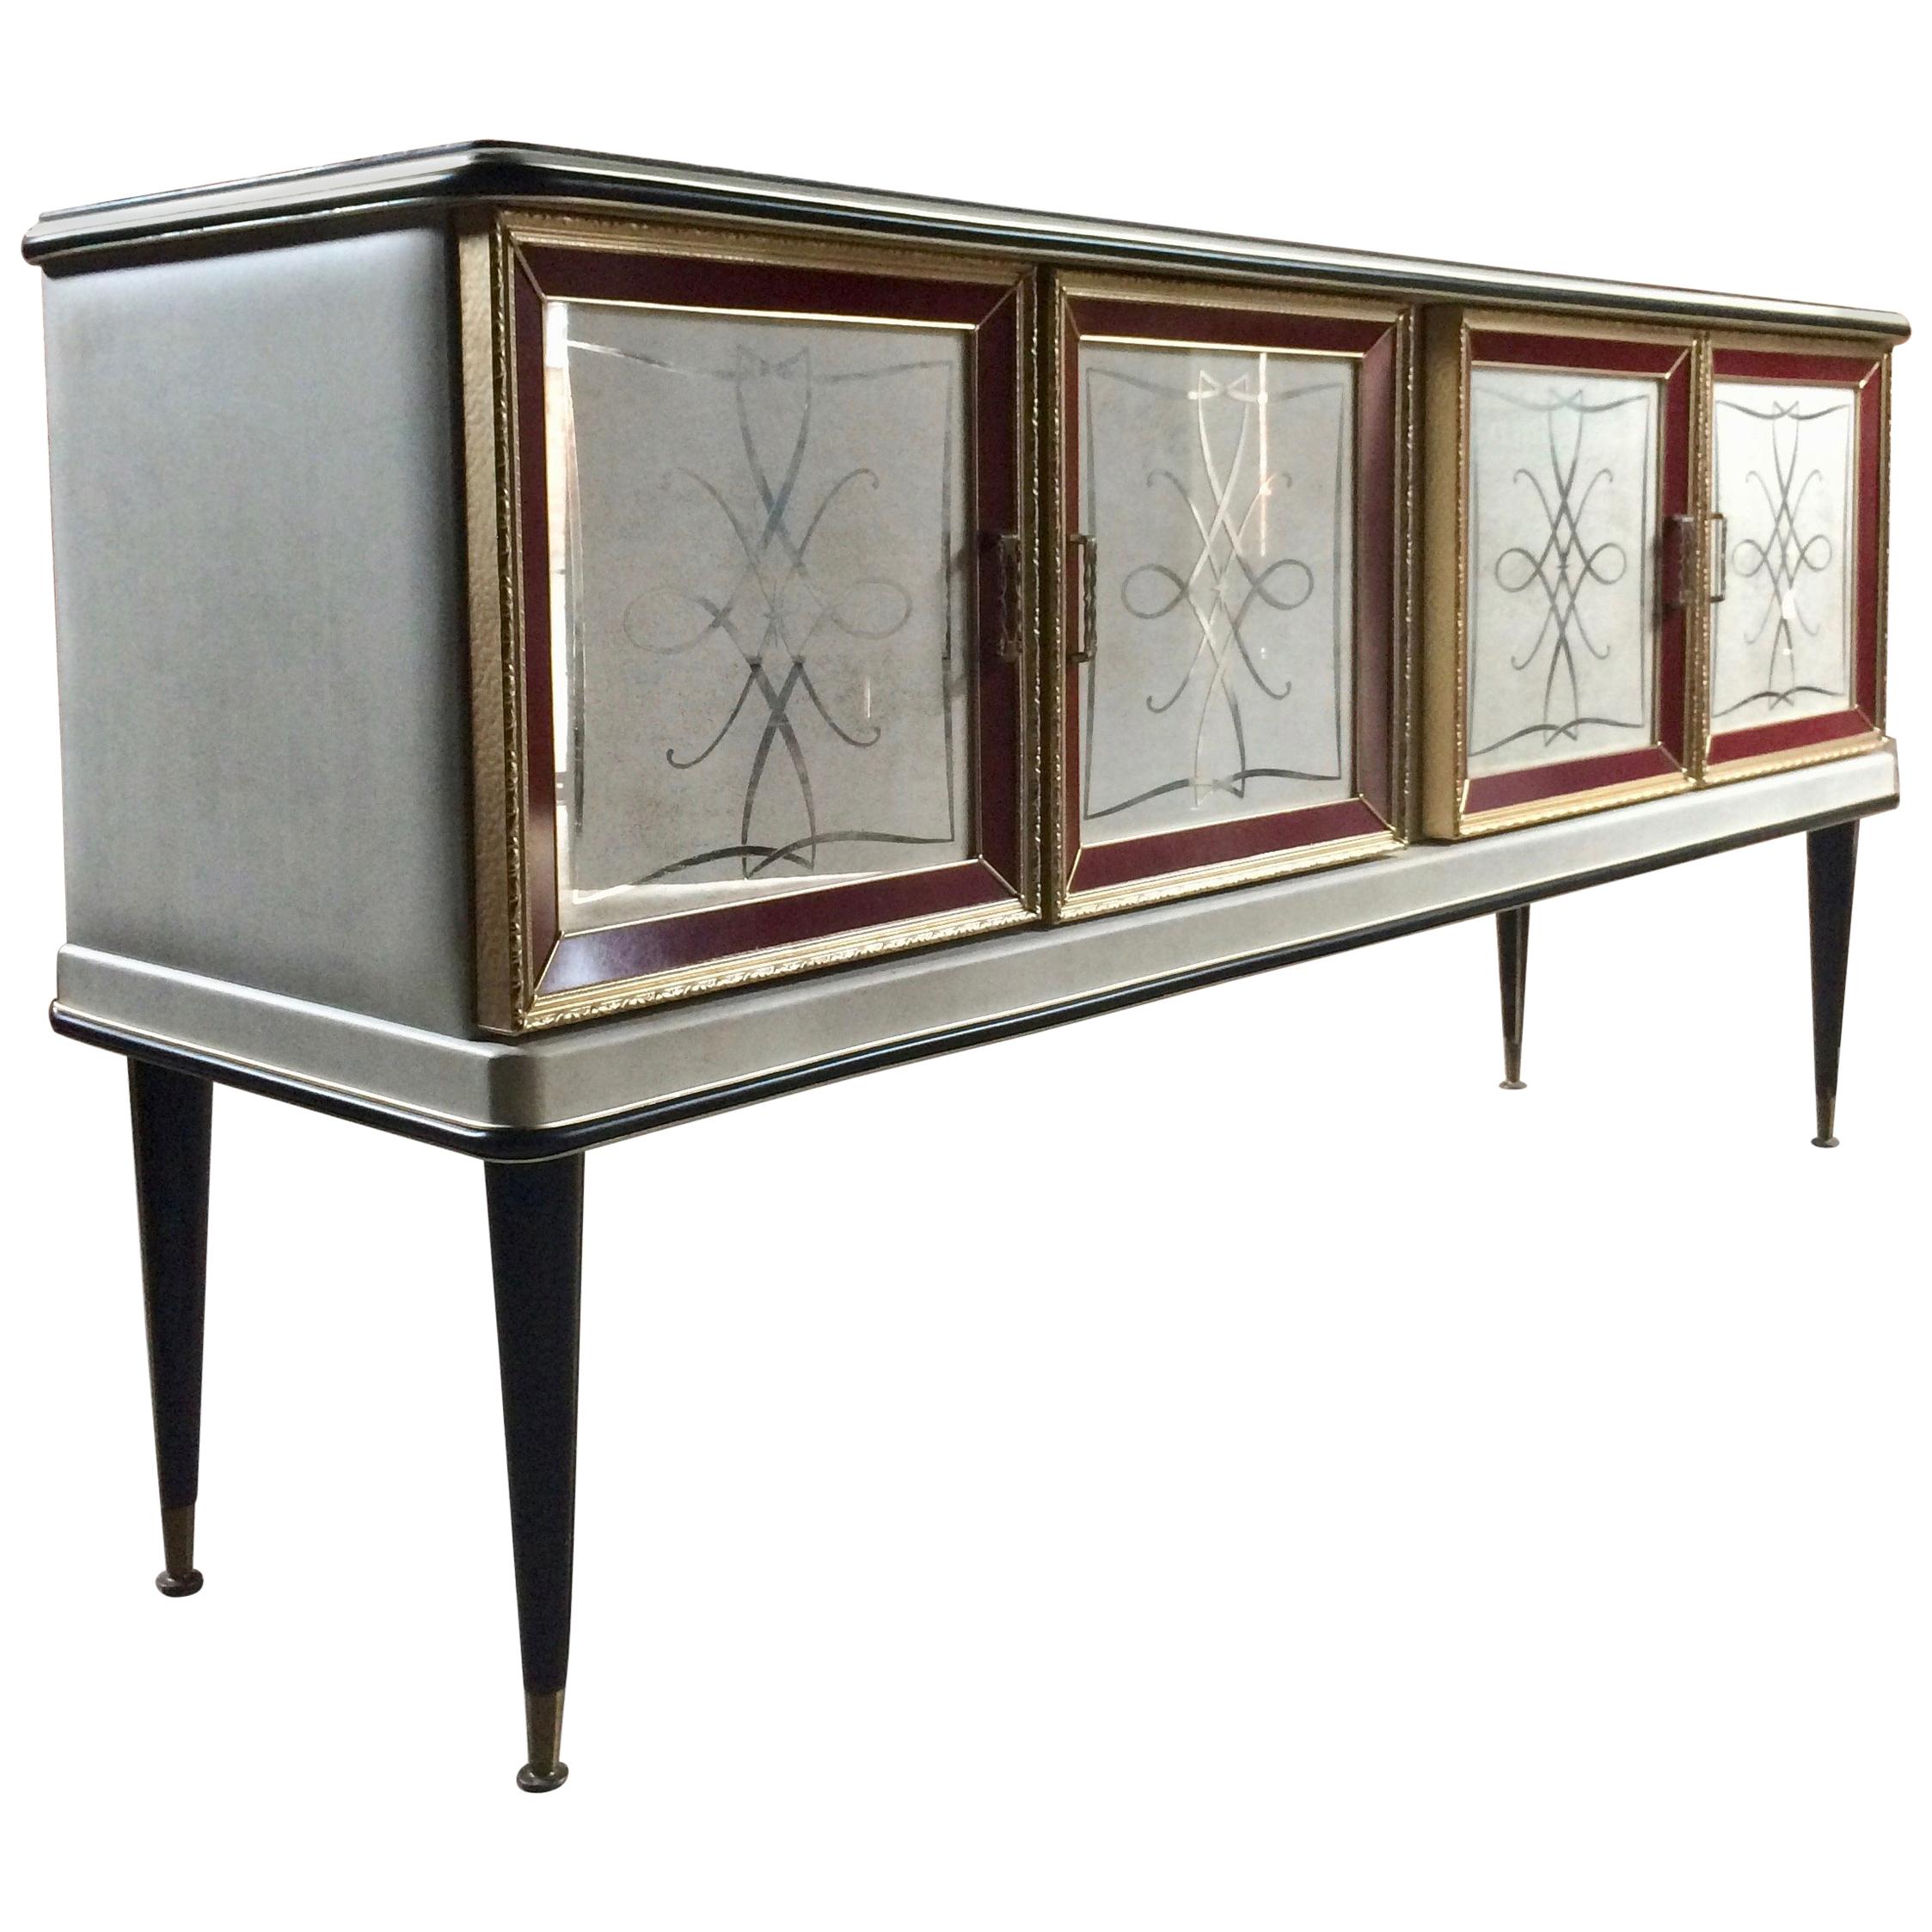 Magnificent Umberto Mascagni 1950s Italian sideboard credenza drinks cabinet, with a long rectangular glass top over four reverse painted glass fronted doors, one bay holding four free running drawers, another bay for bottles and larger items and